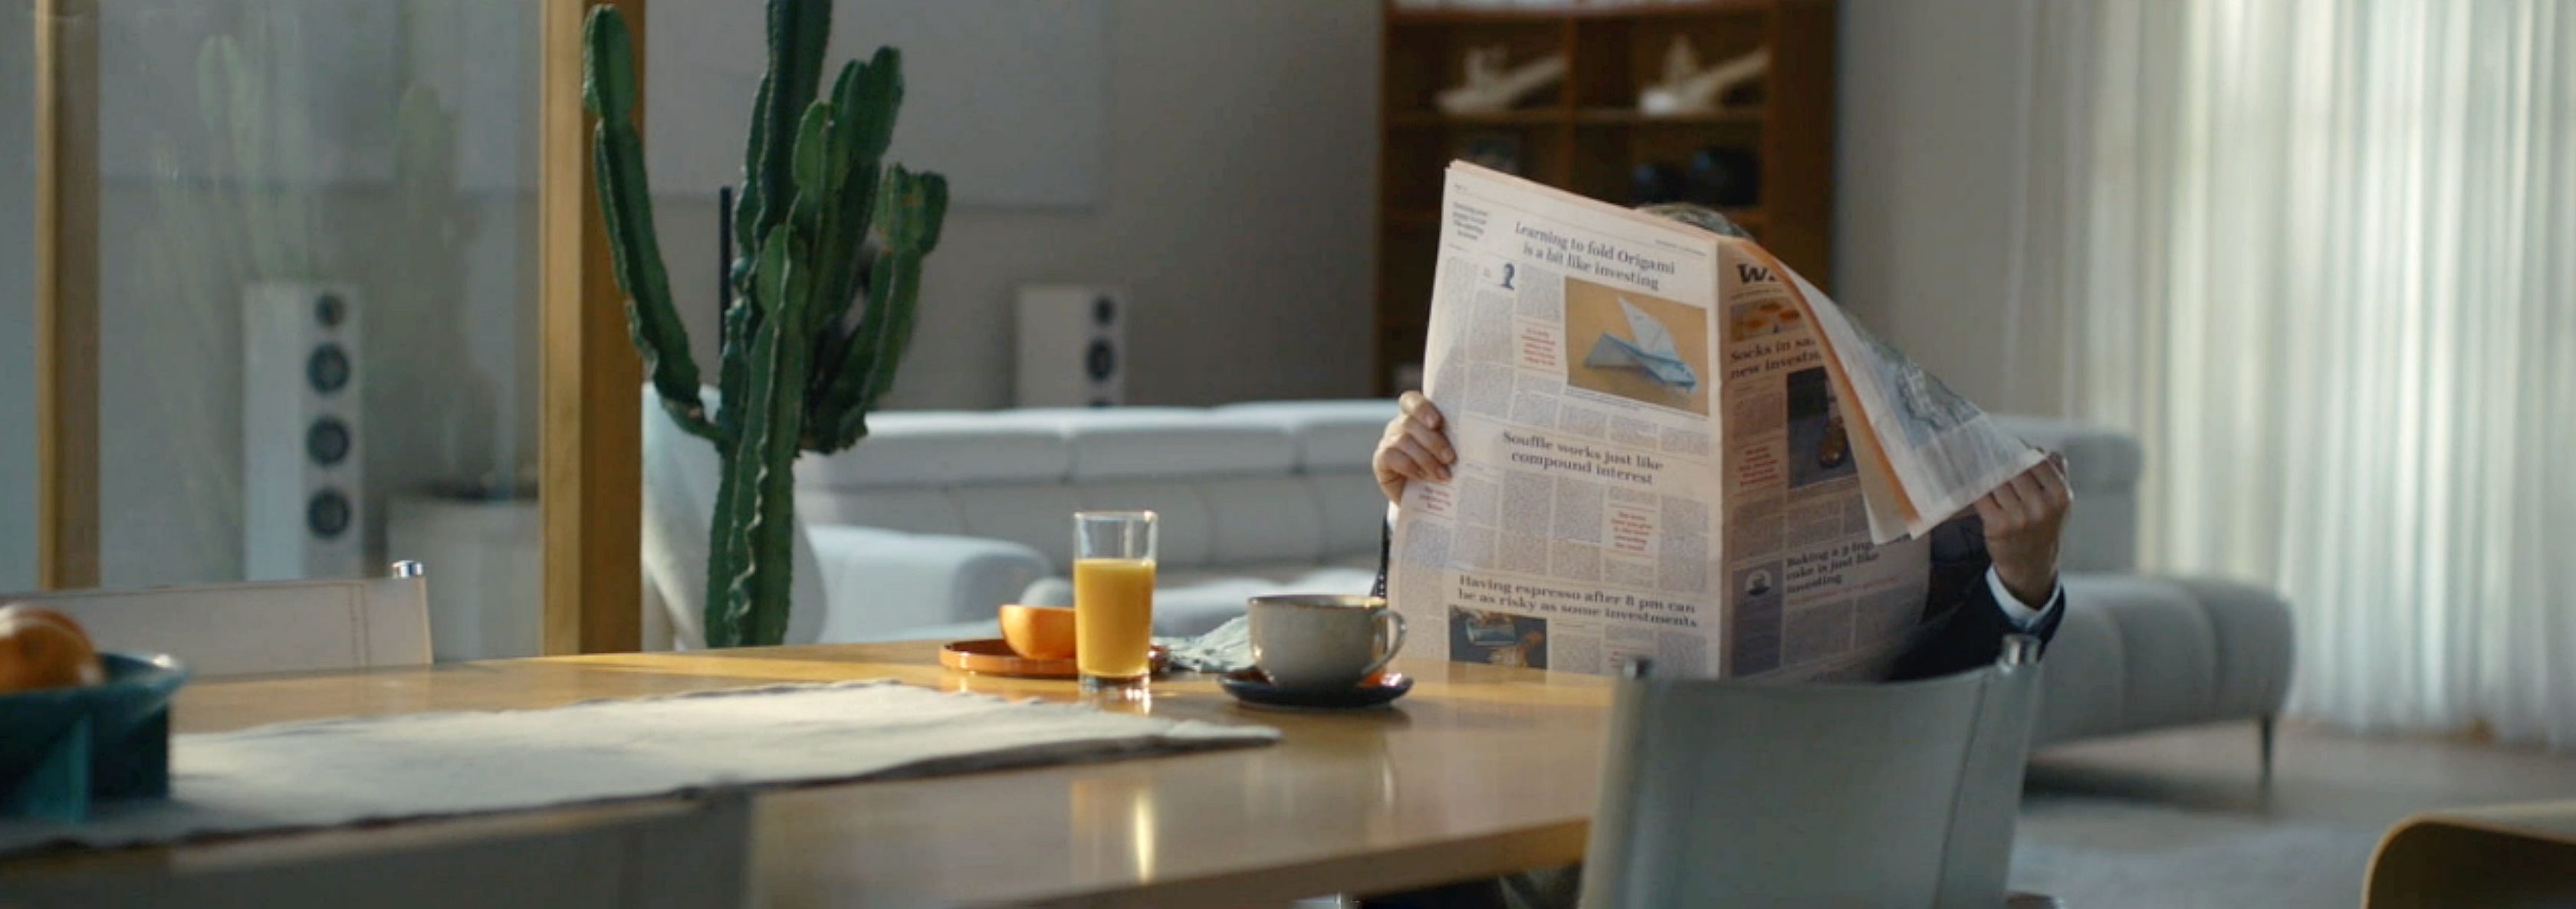 Christoph Waltz hidden behind newspaper which he is reading sitting on a table